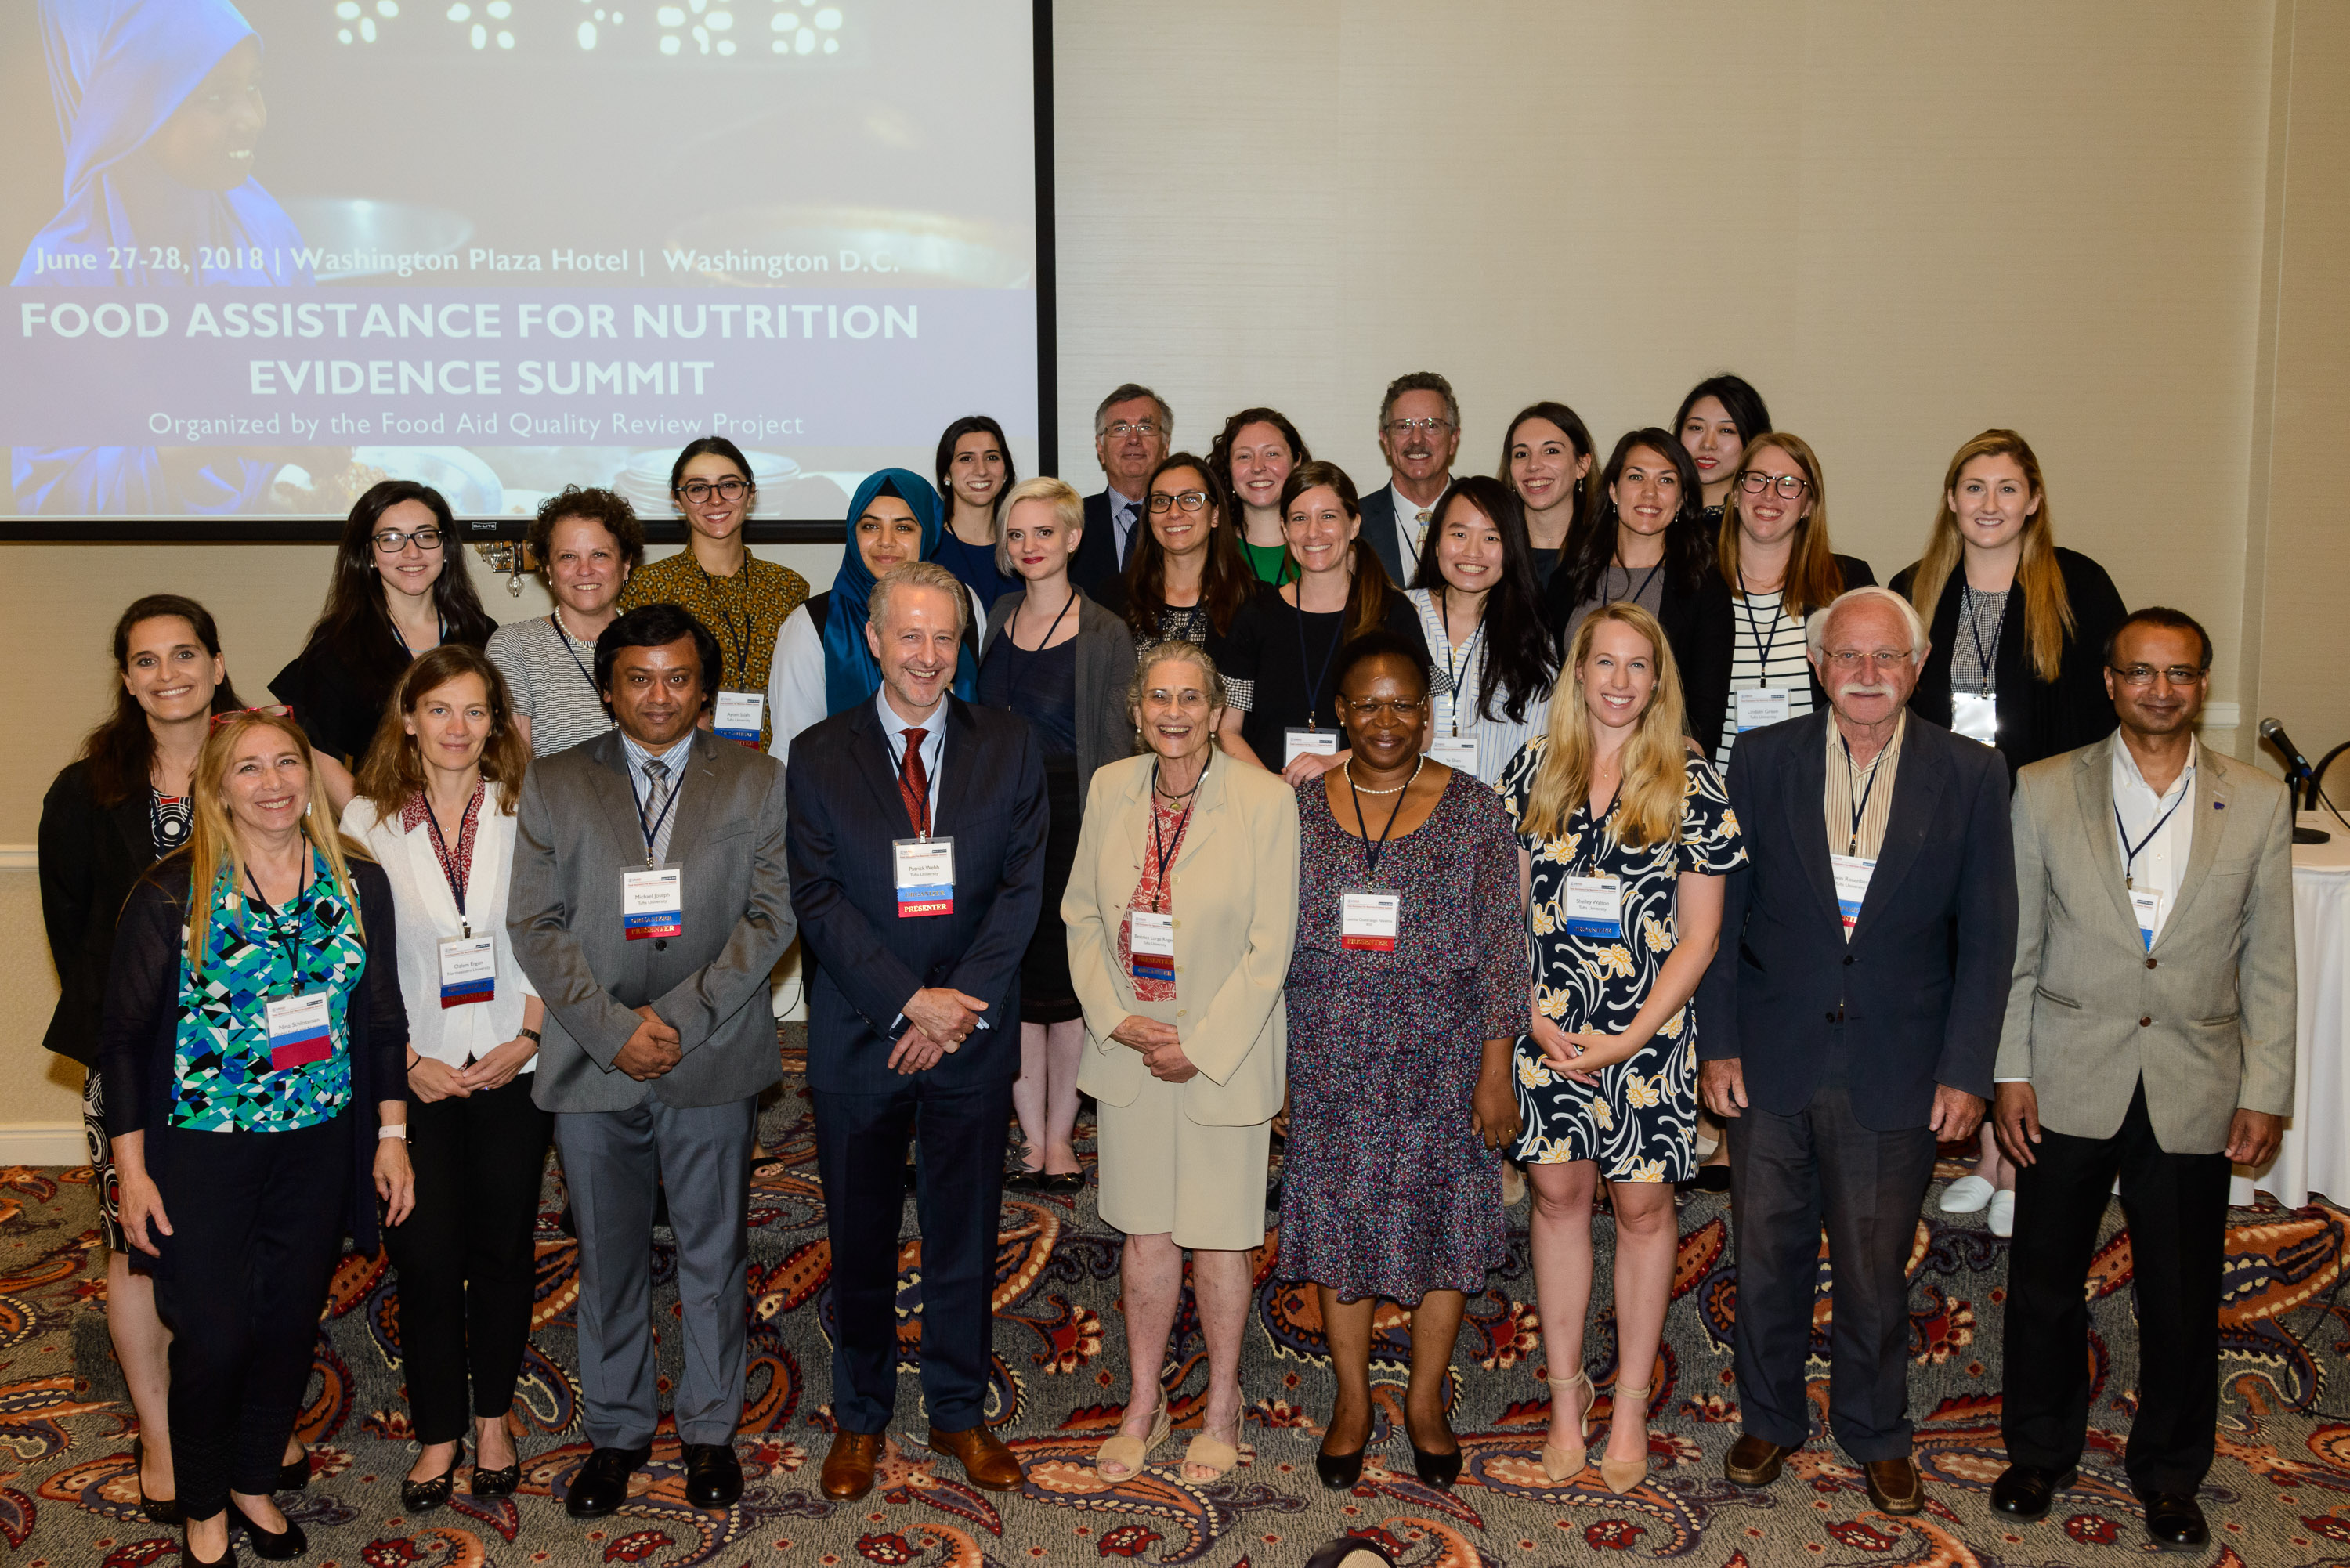 Faculty members Patrick Webb, Bea Rogers, and Irv Rosenberg gather with staff and summit participants